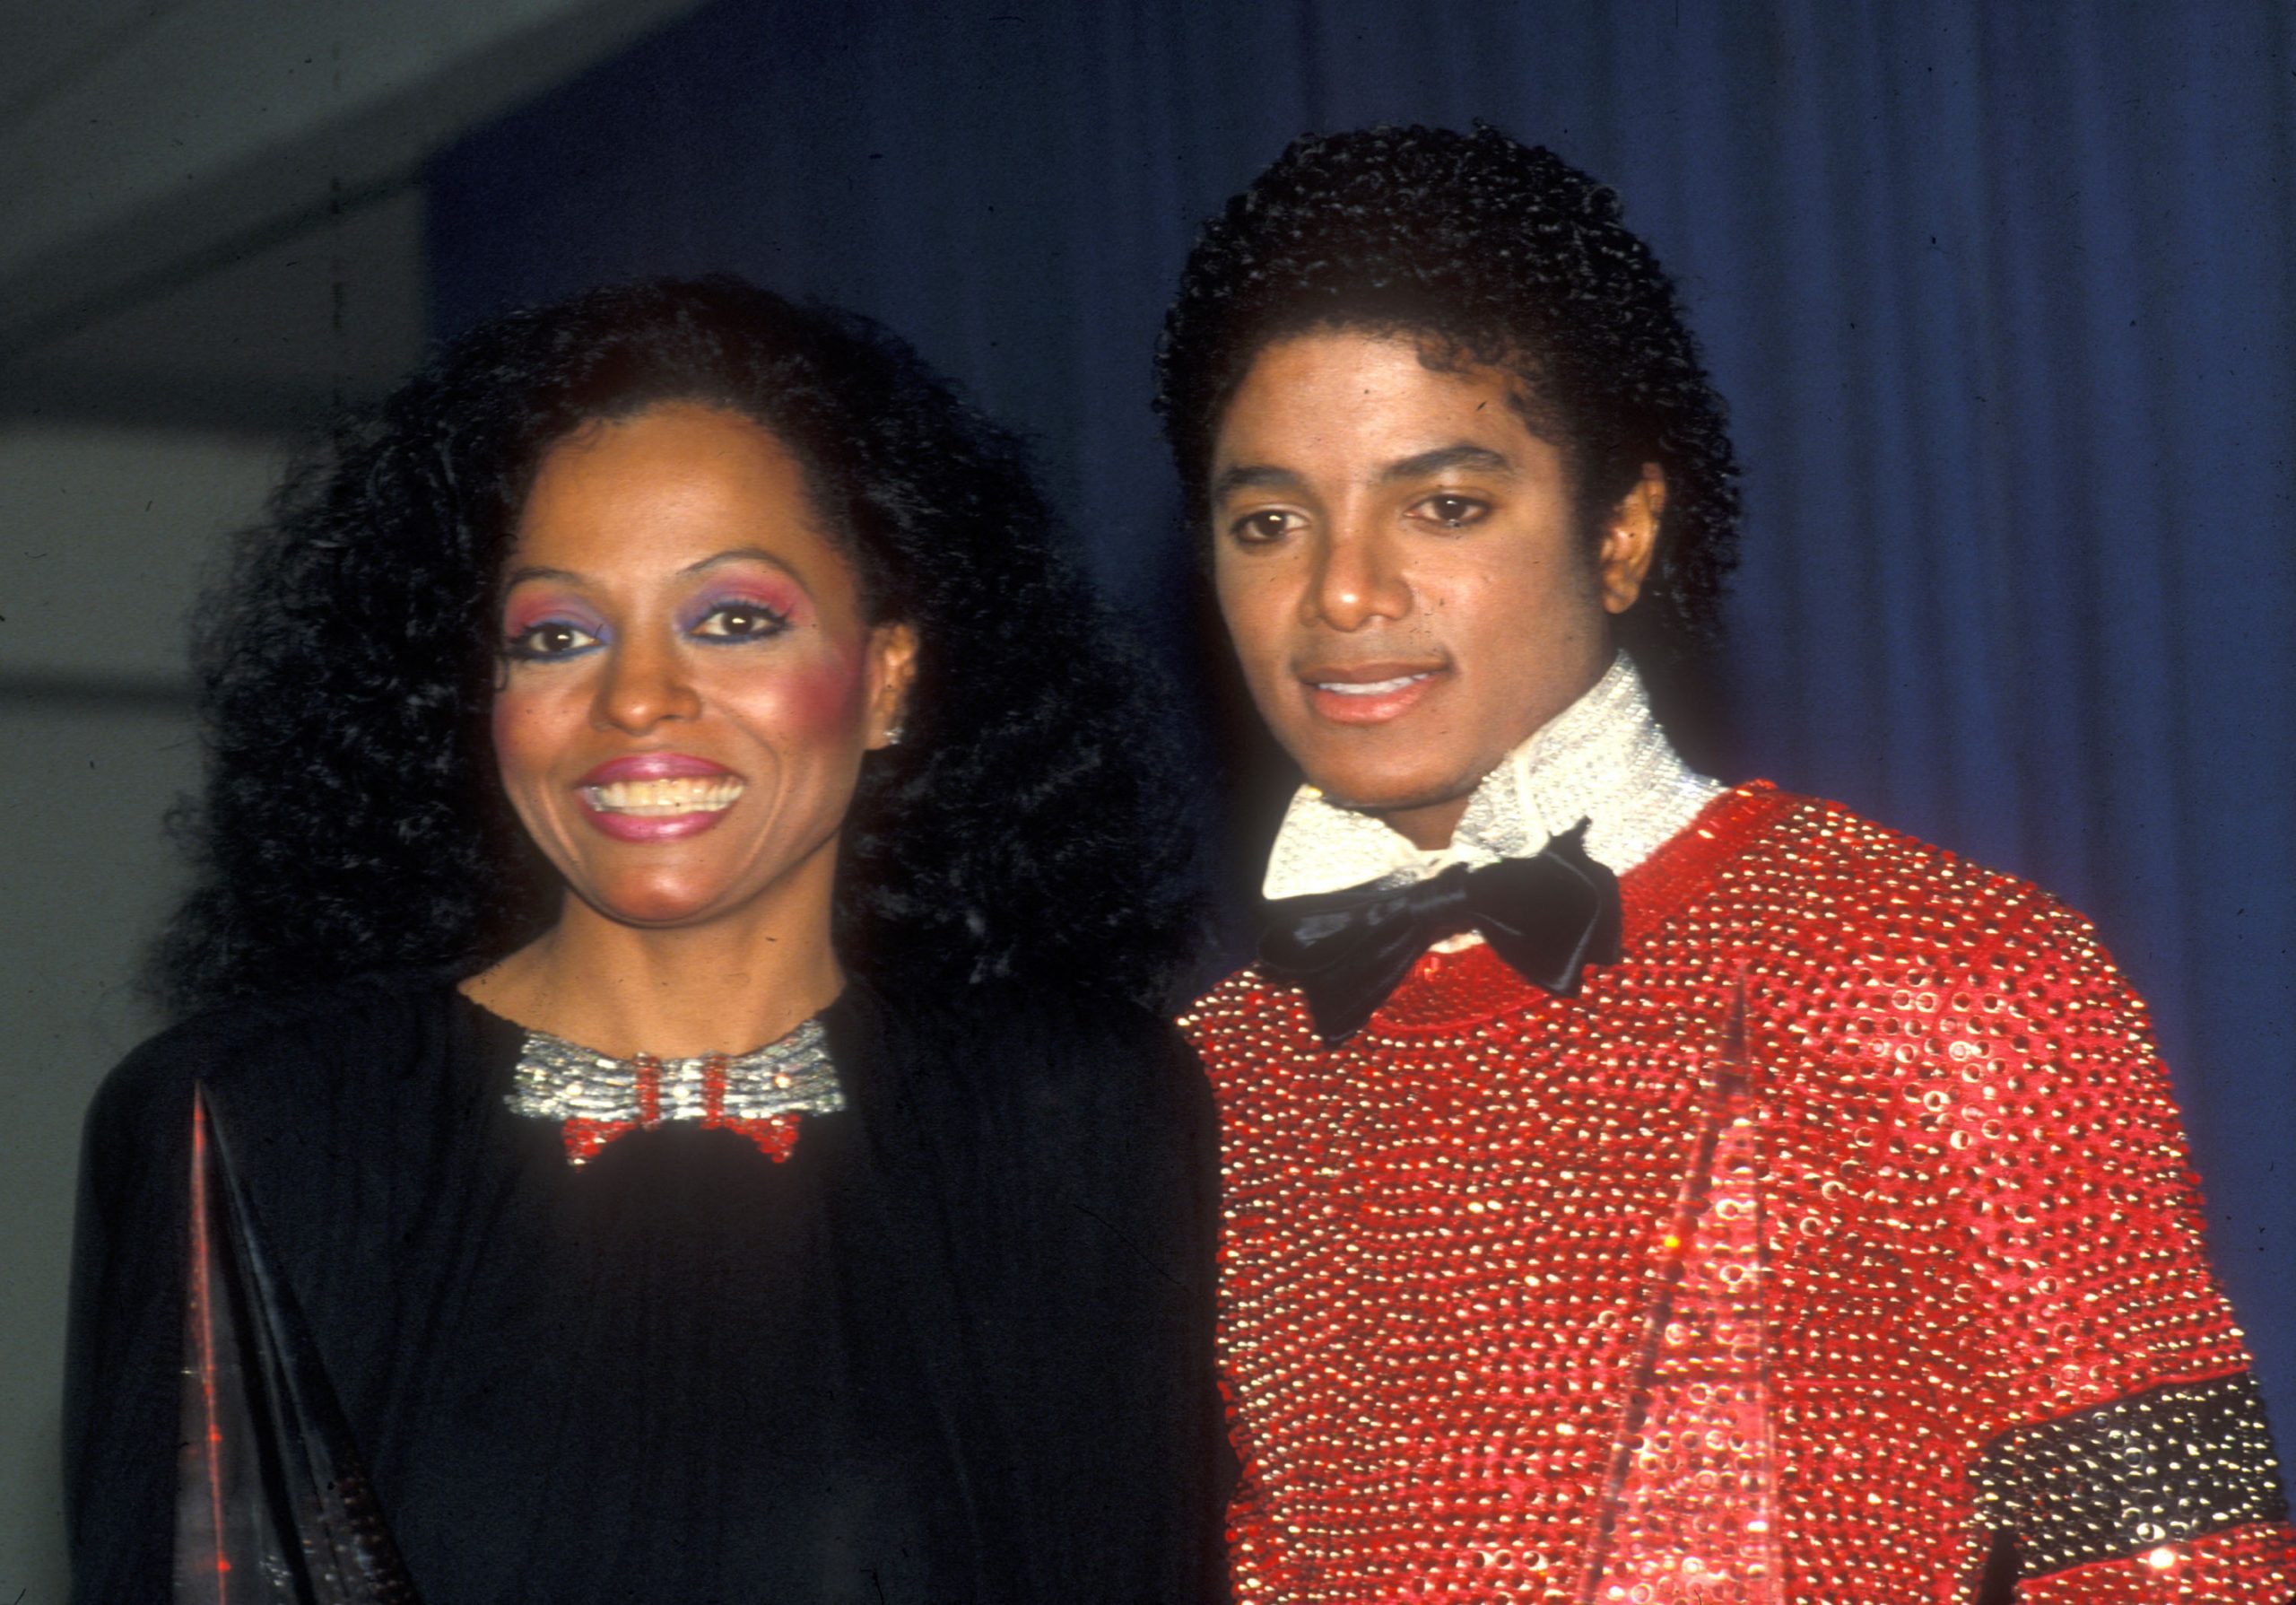 Michael Jackson and Diana Ross with a black background